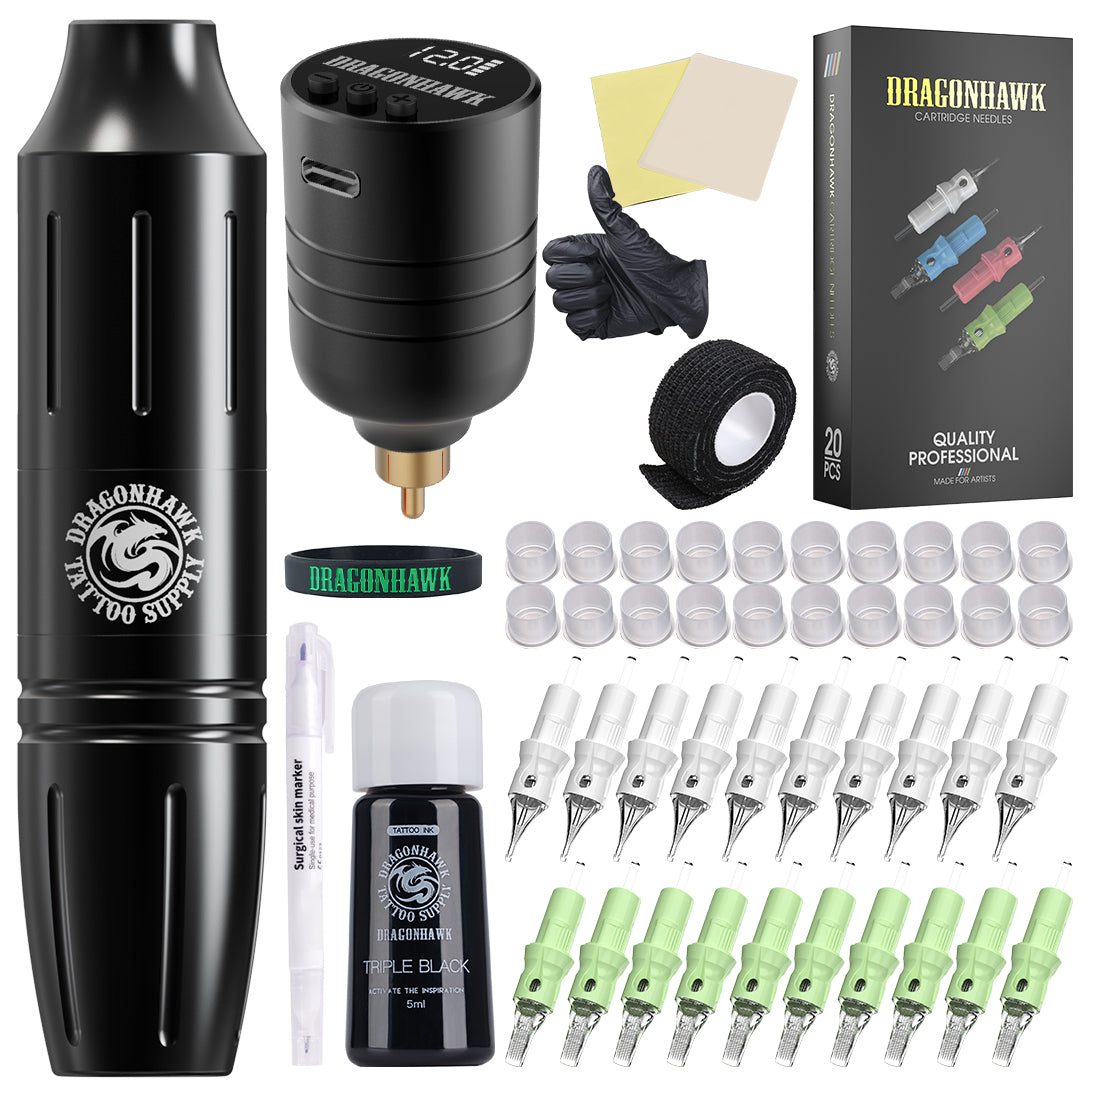 Tattoo gizmo Permanent Tattoo Kit With Machine, Needles, Power Supply And  More Equipments Permanent Tattoo Kit Price in India - Buy Tattoo gizmo  Permanent Tattoo Kit With Machine, Needles, Power Supply And